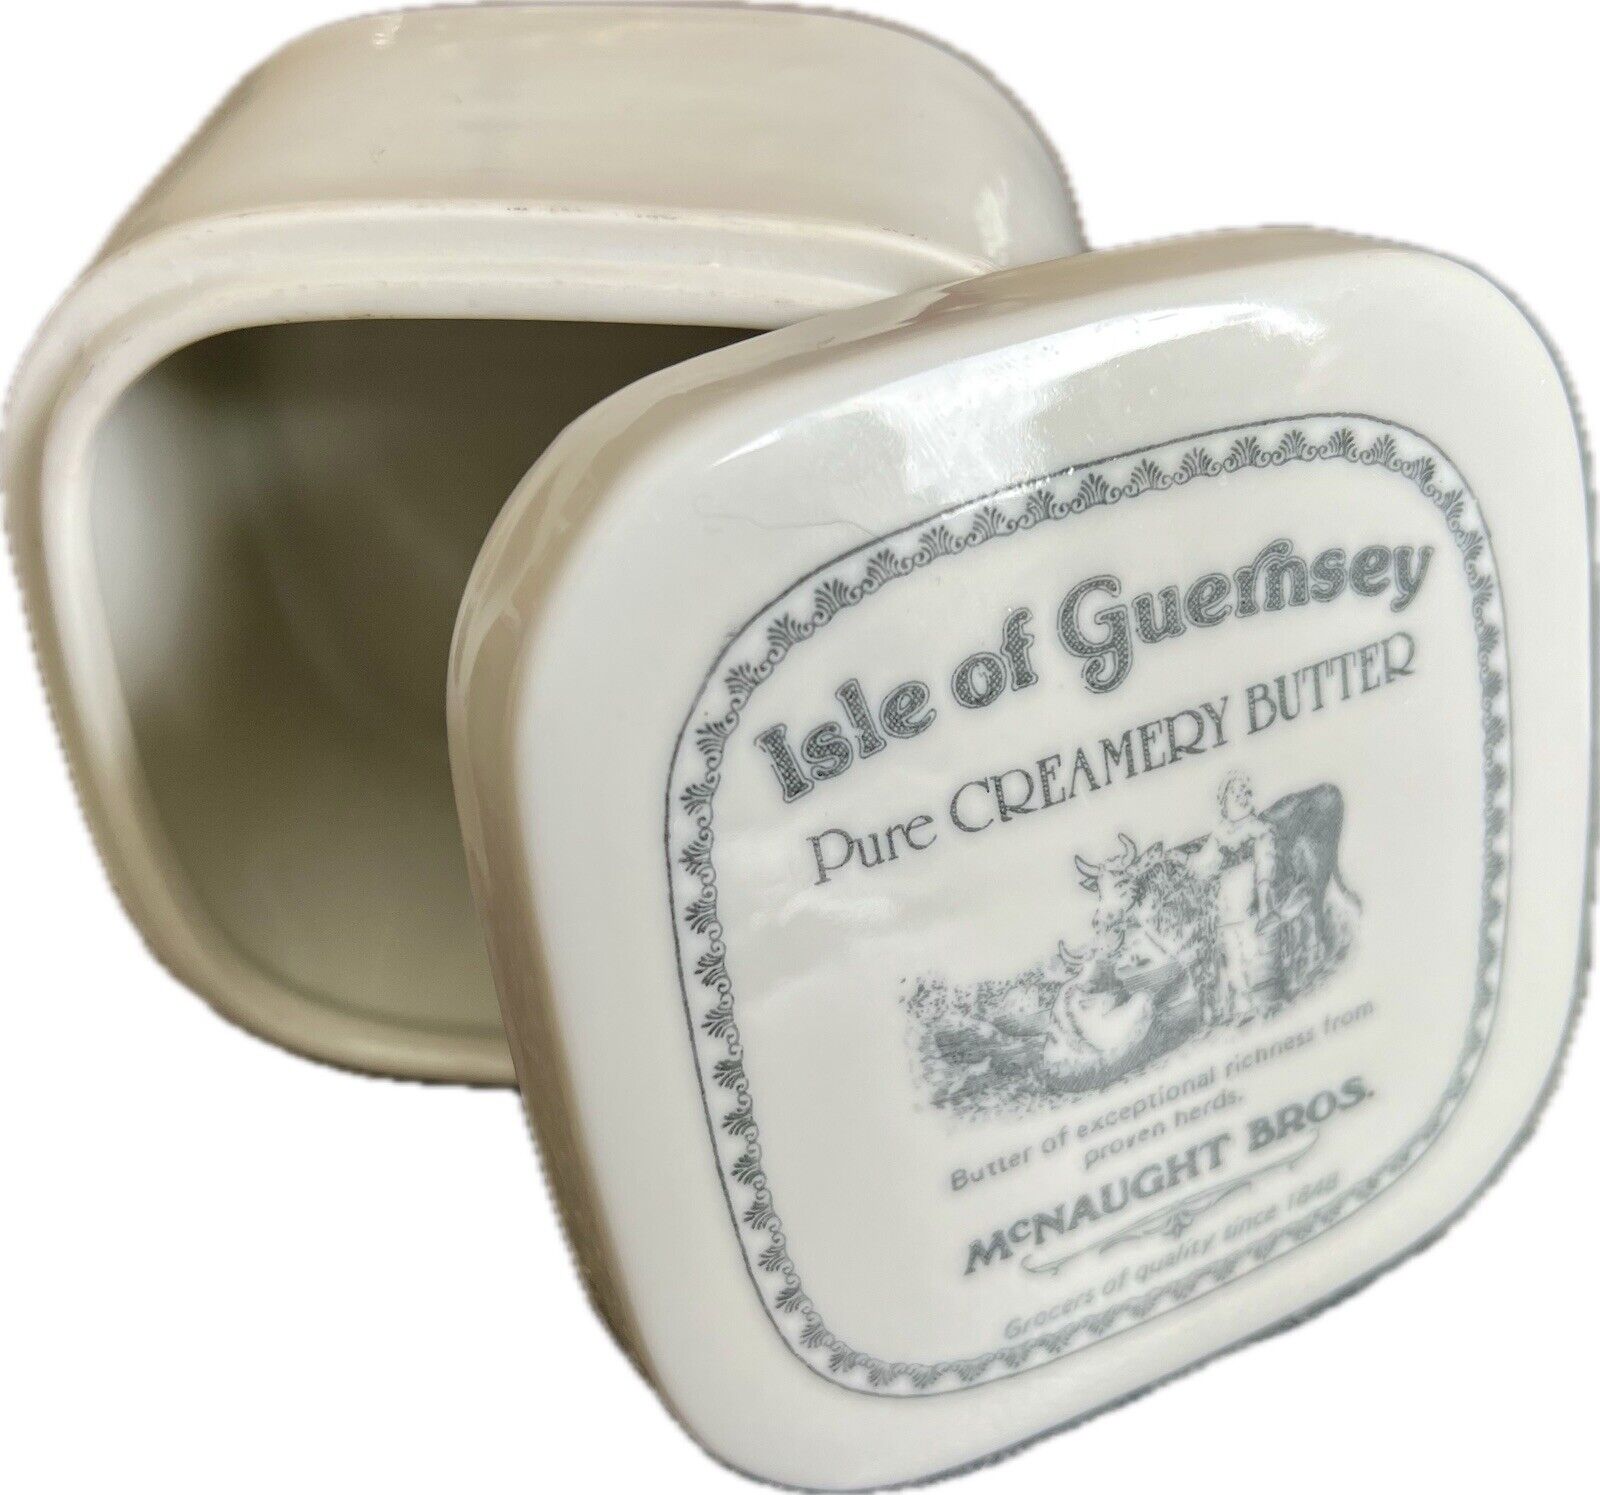 Isle of Guernsey Pure Creamery Butter McNaught Bros Container Farmhouse No Chips